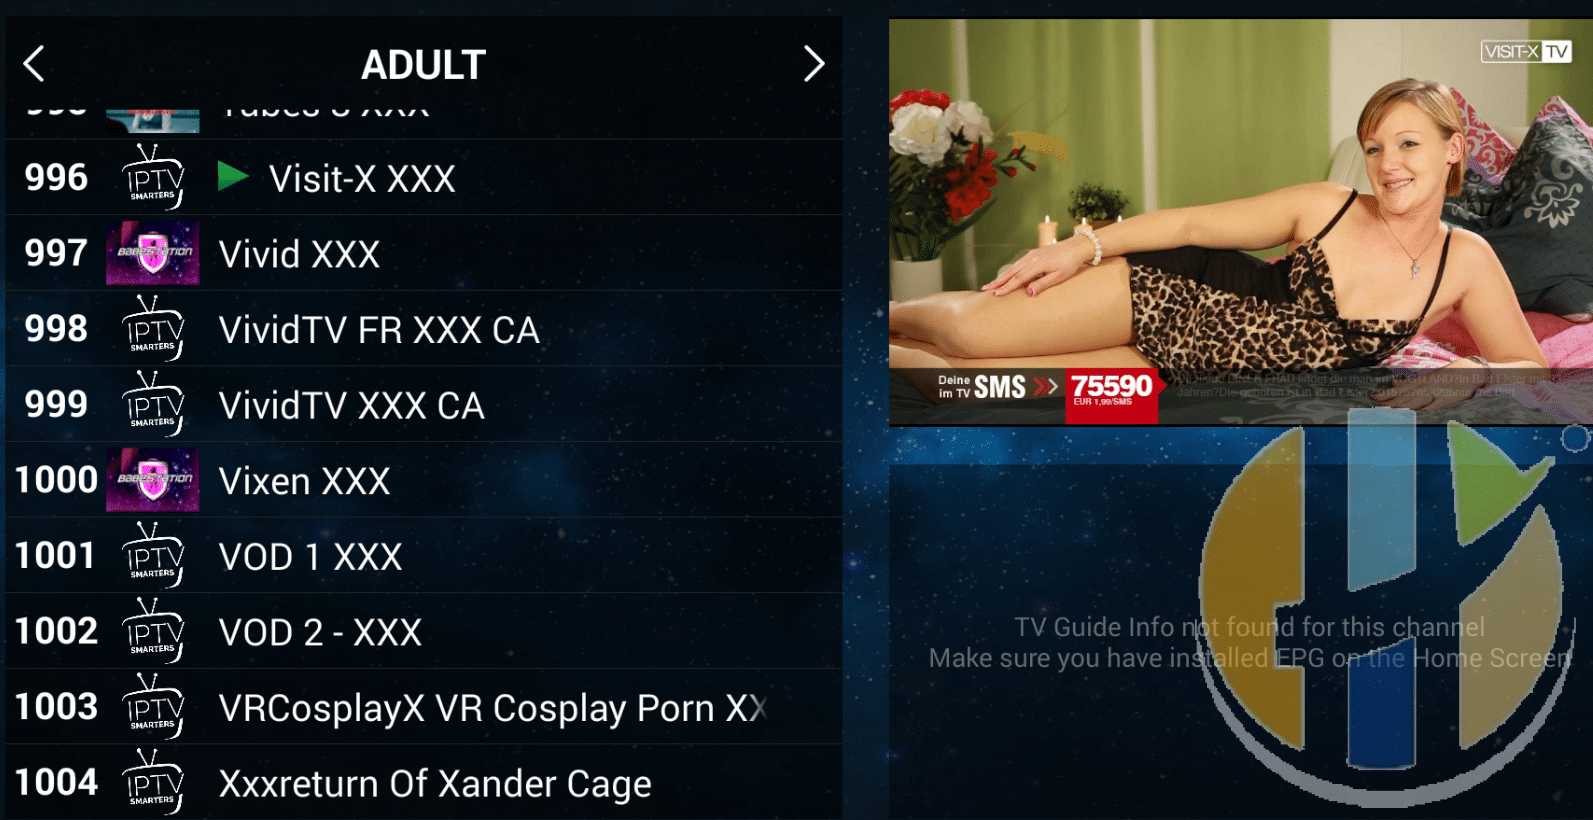 Free adult images - collection of porn tv channels that allows you to watch...